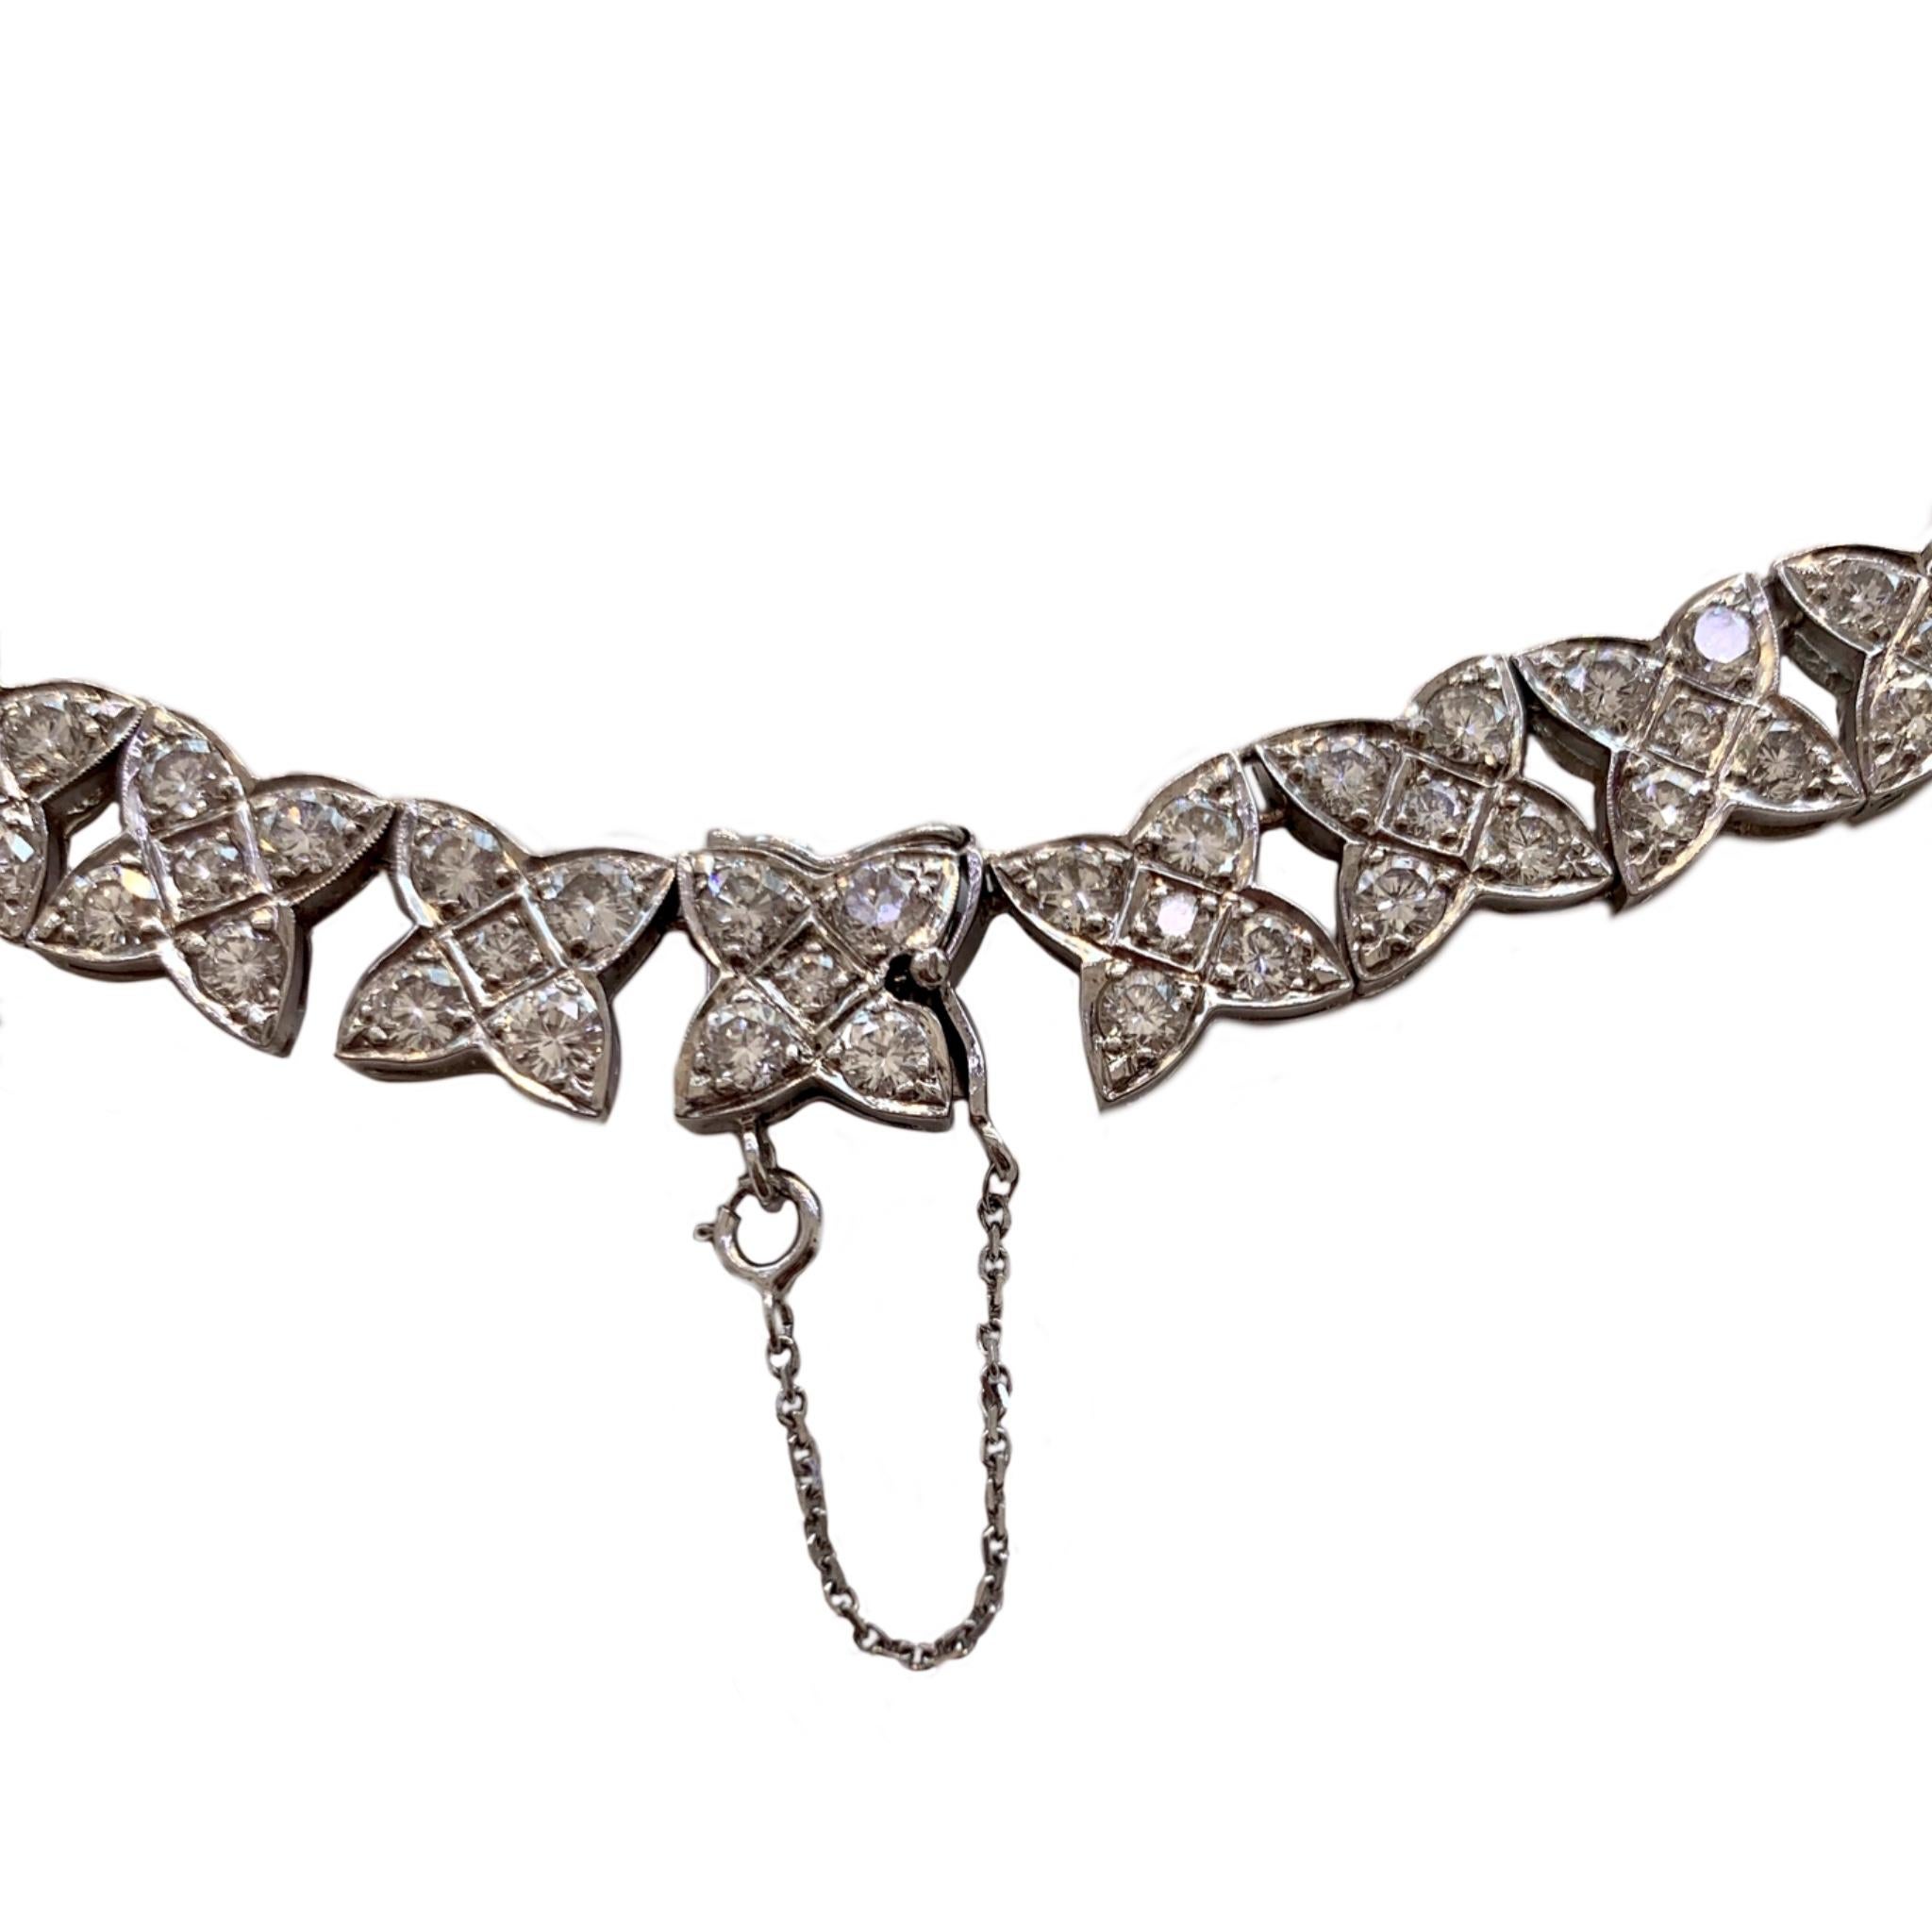 Stunning formal diamond collar necklace set with 195 brilliant cut diamonds, total weight is over 15 carats. 